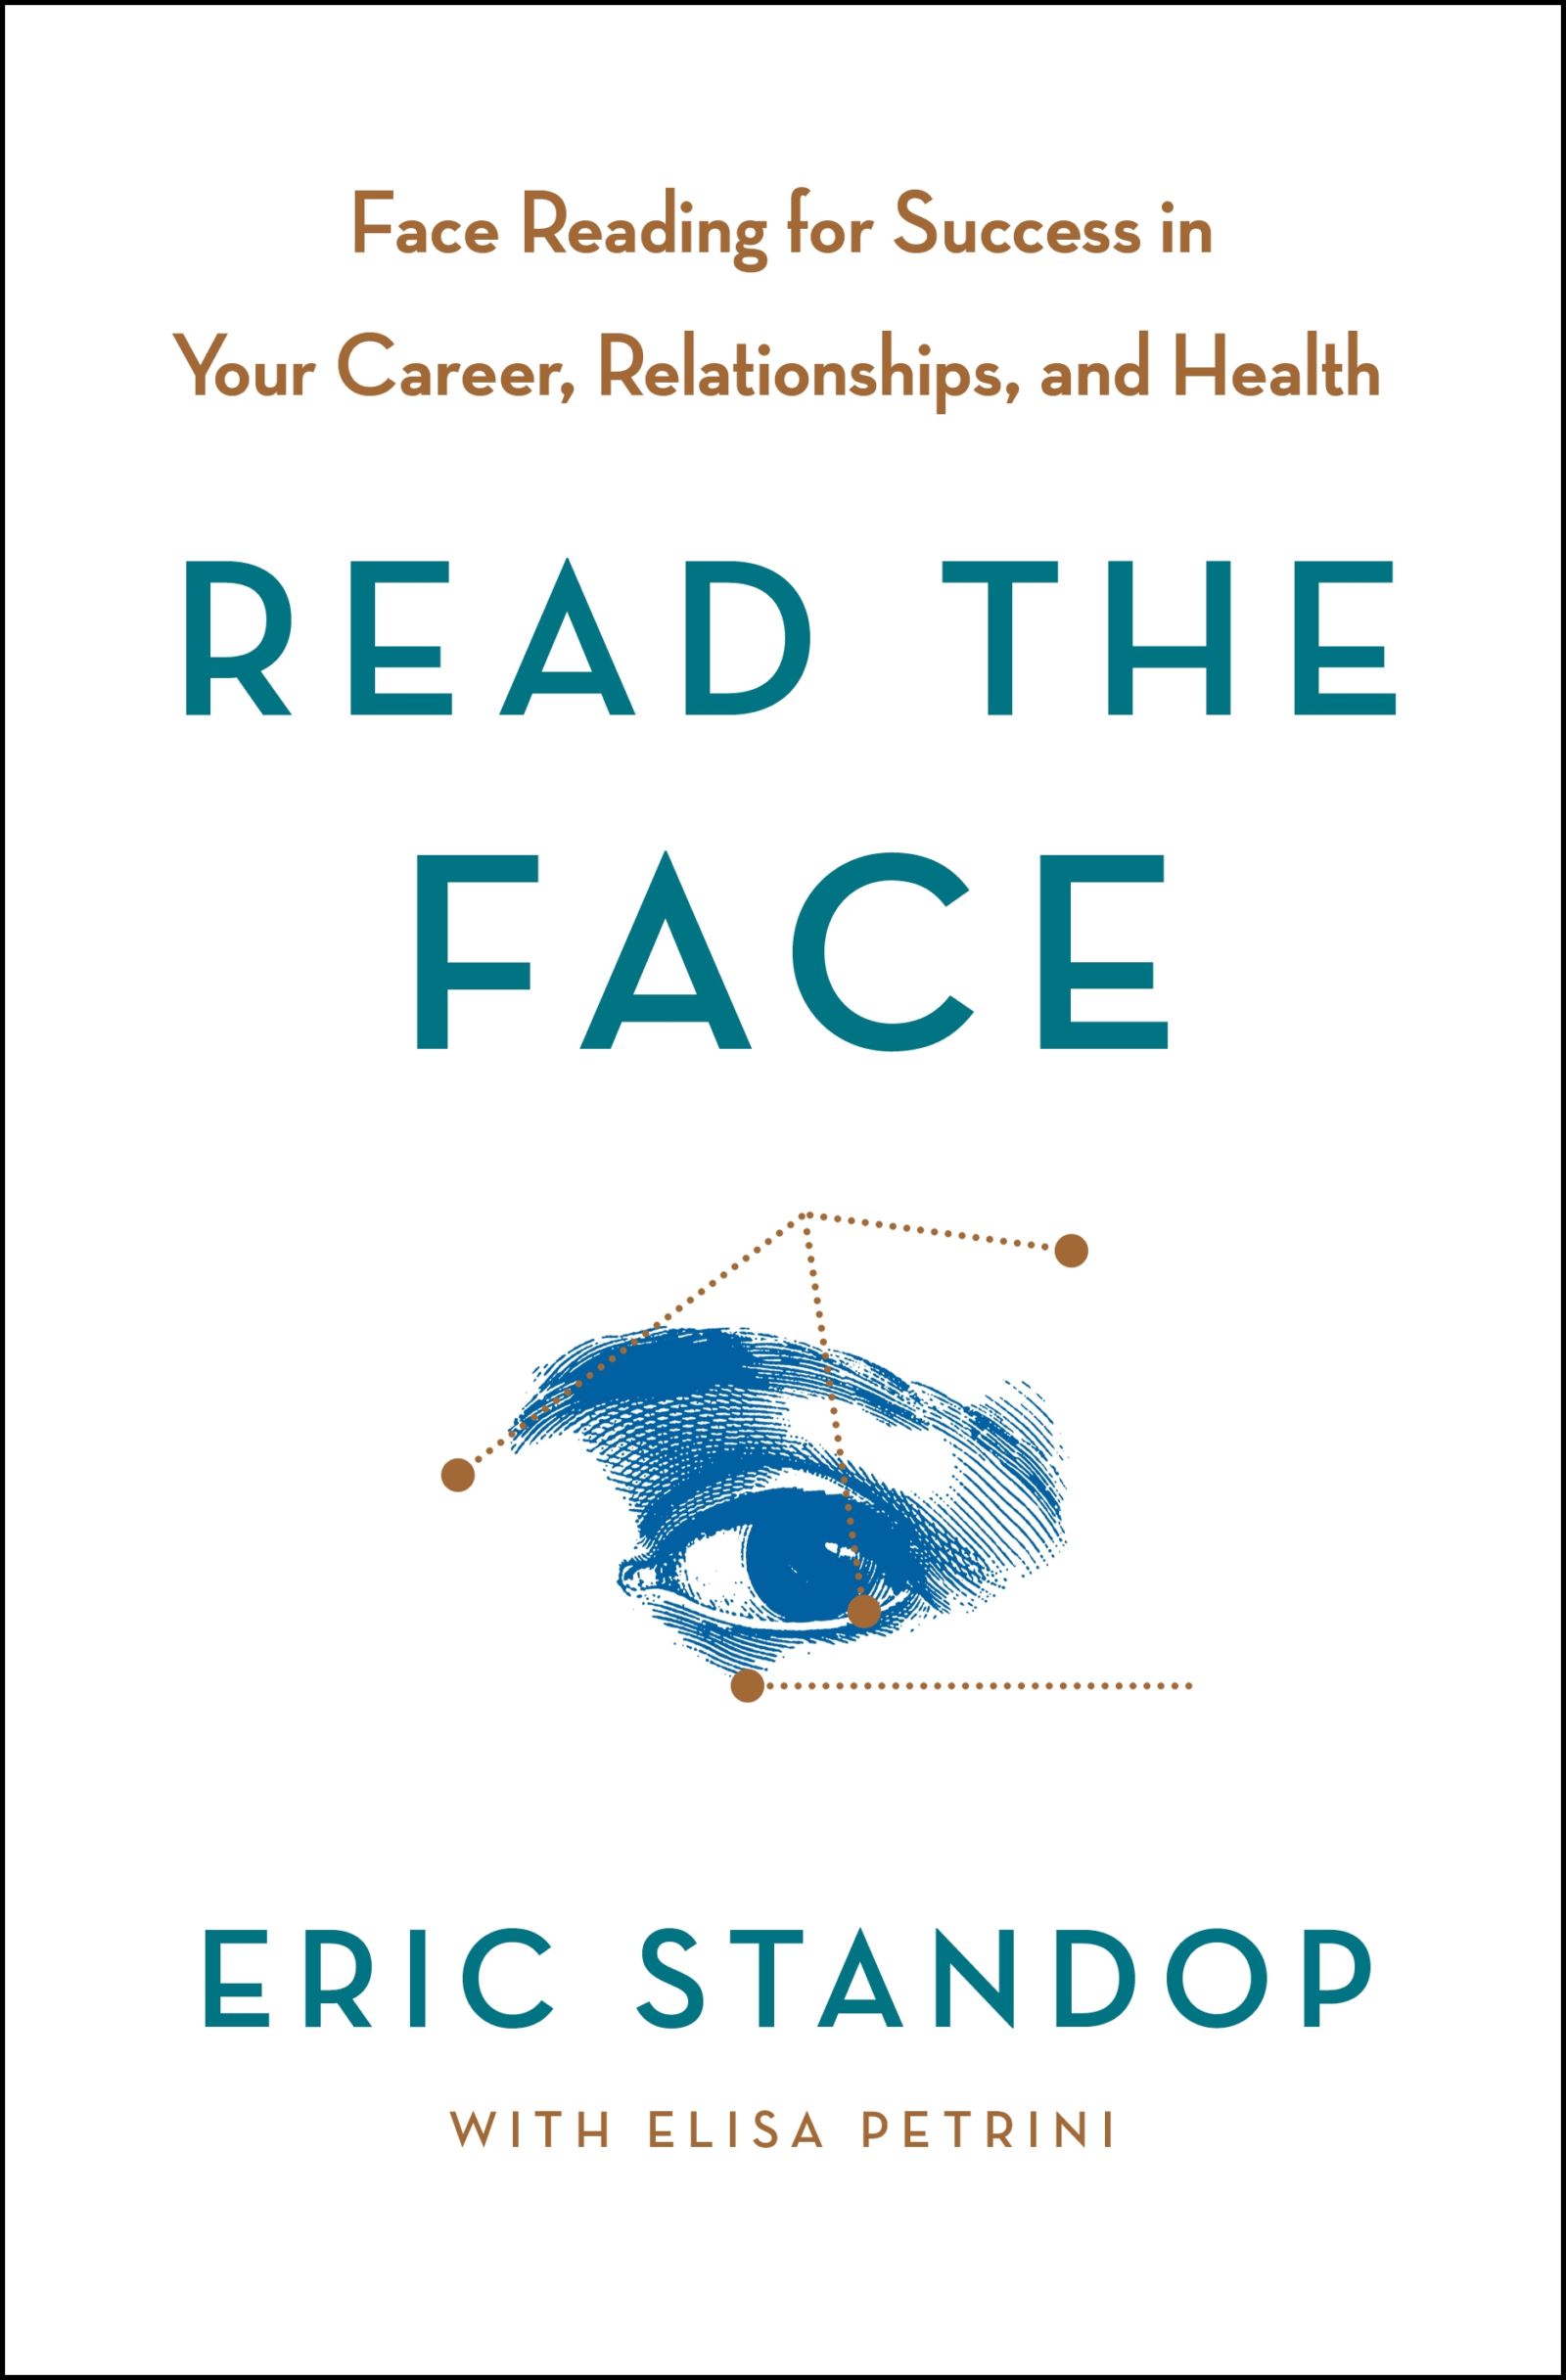 Eric Standop book Read the Face Face Reading for Success in Your Career Relationships and Health